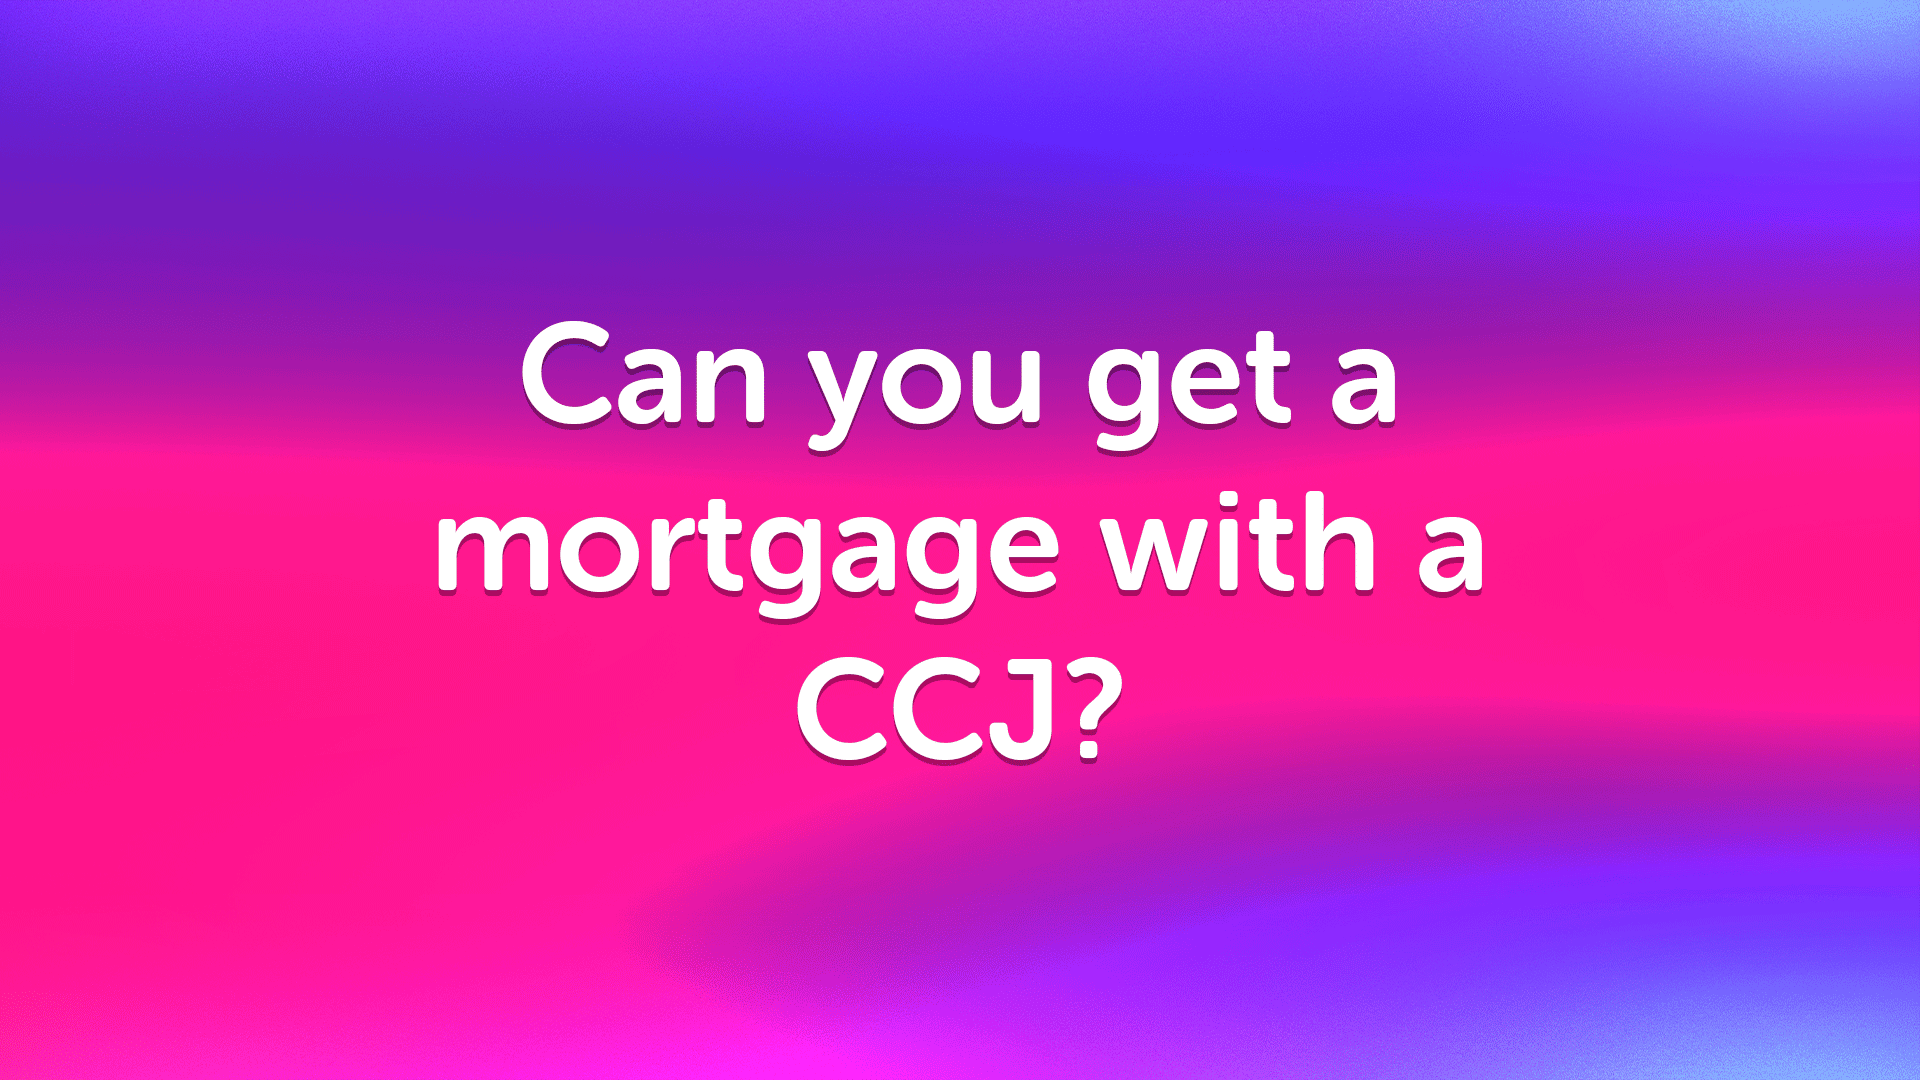 Can You Get a Mortgage With a CCJ in Sunderland